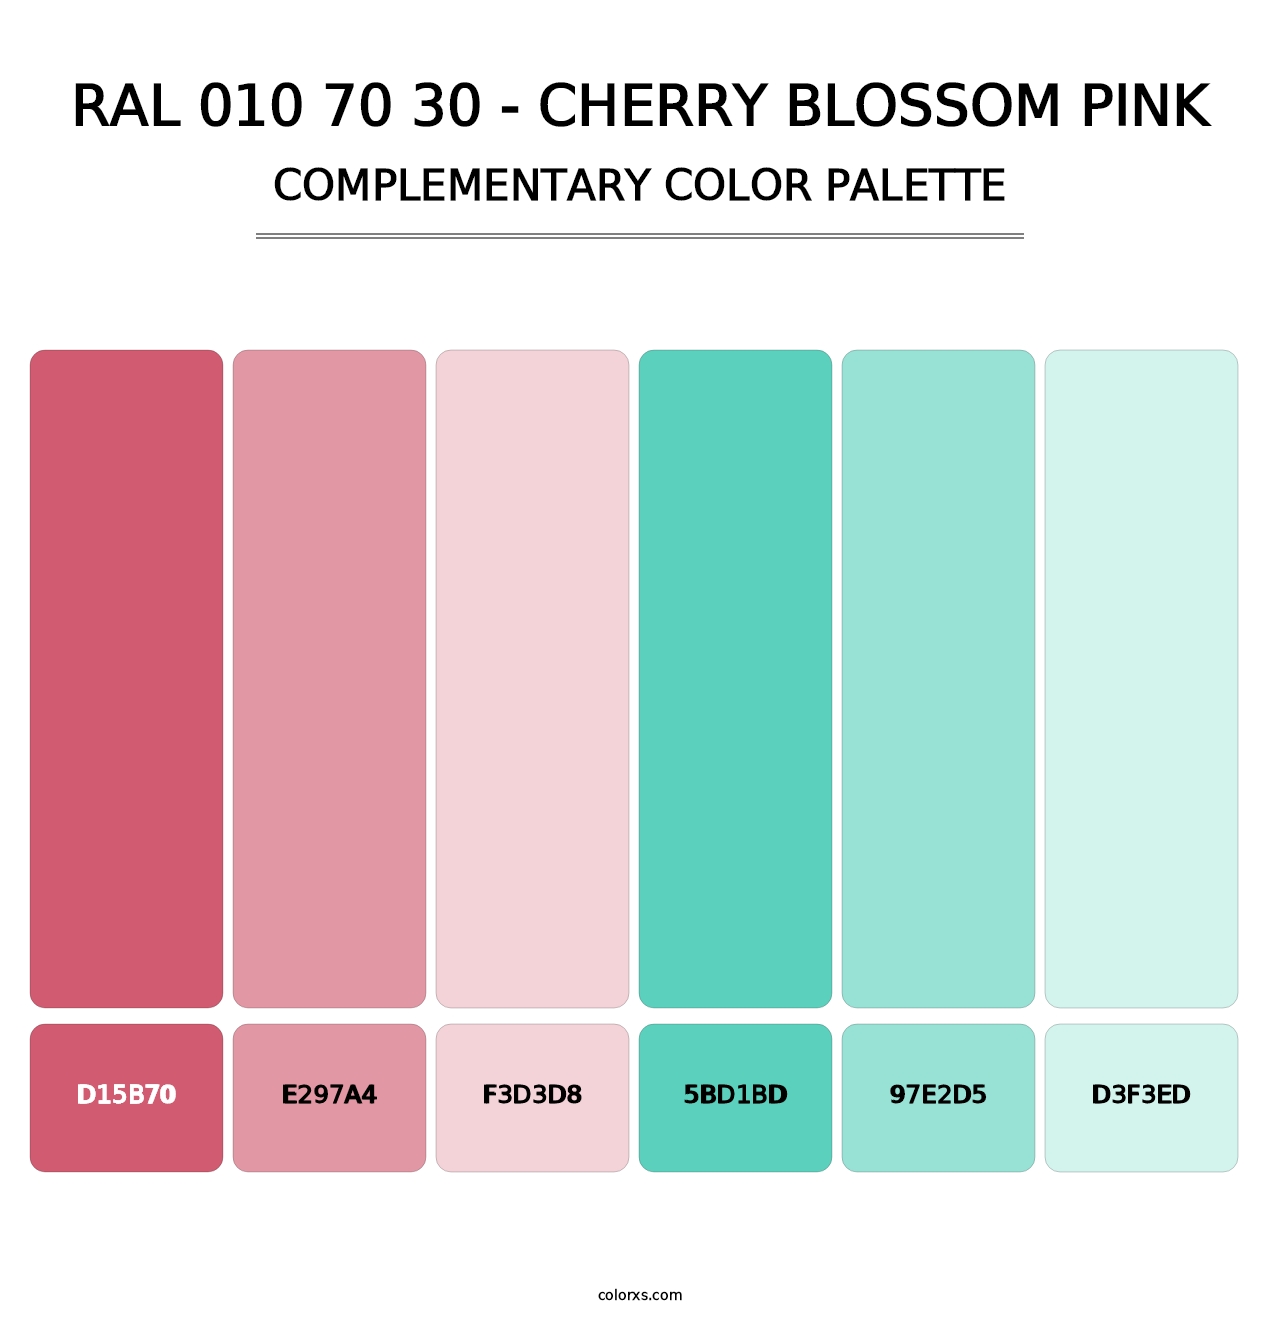 RAL 010 70 30 - Cherry Blossom Pink - Complementary Color Palette